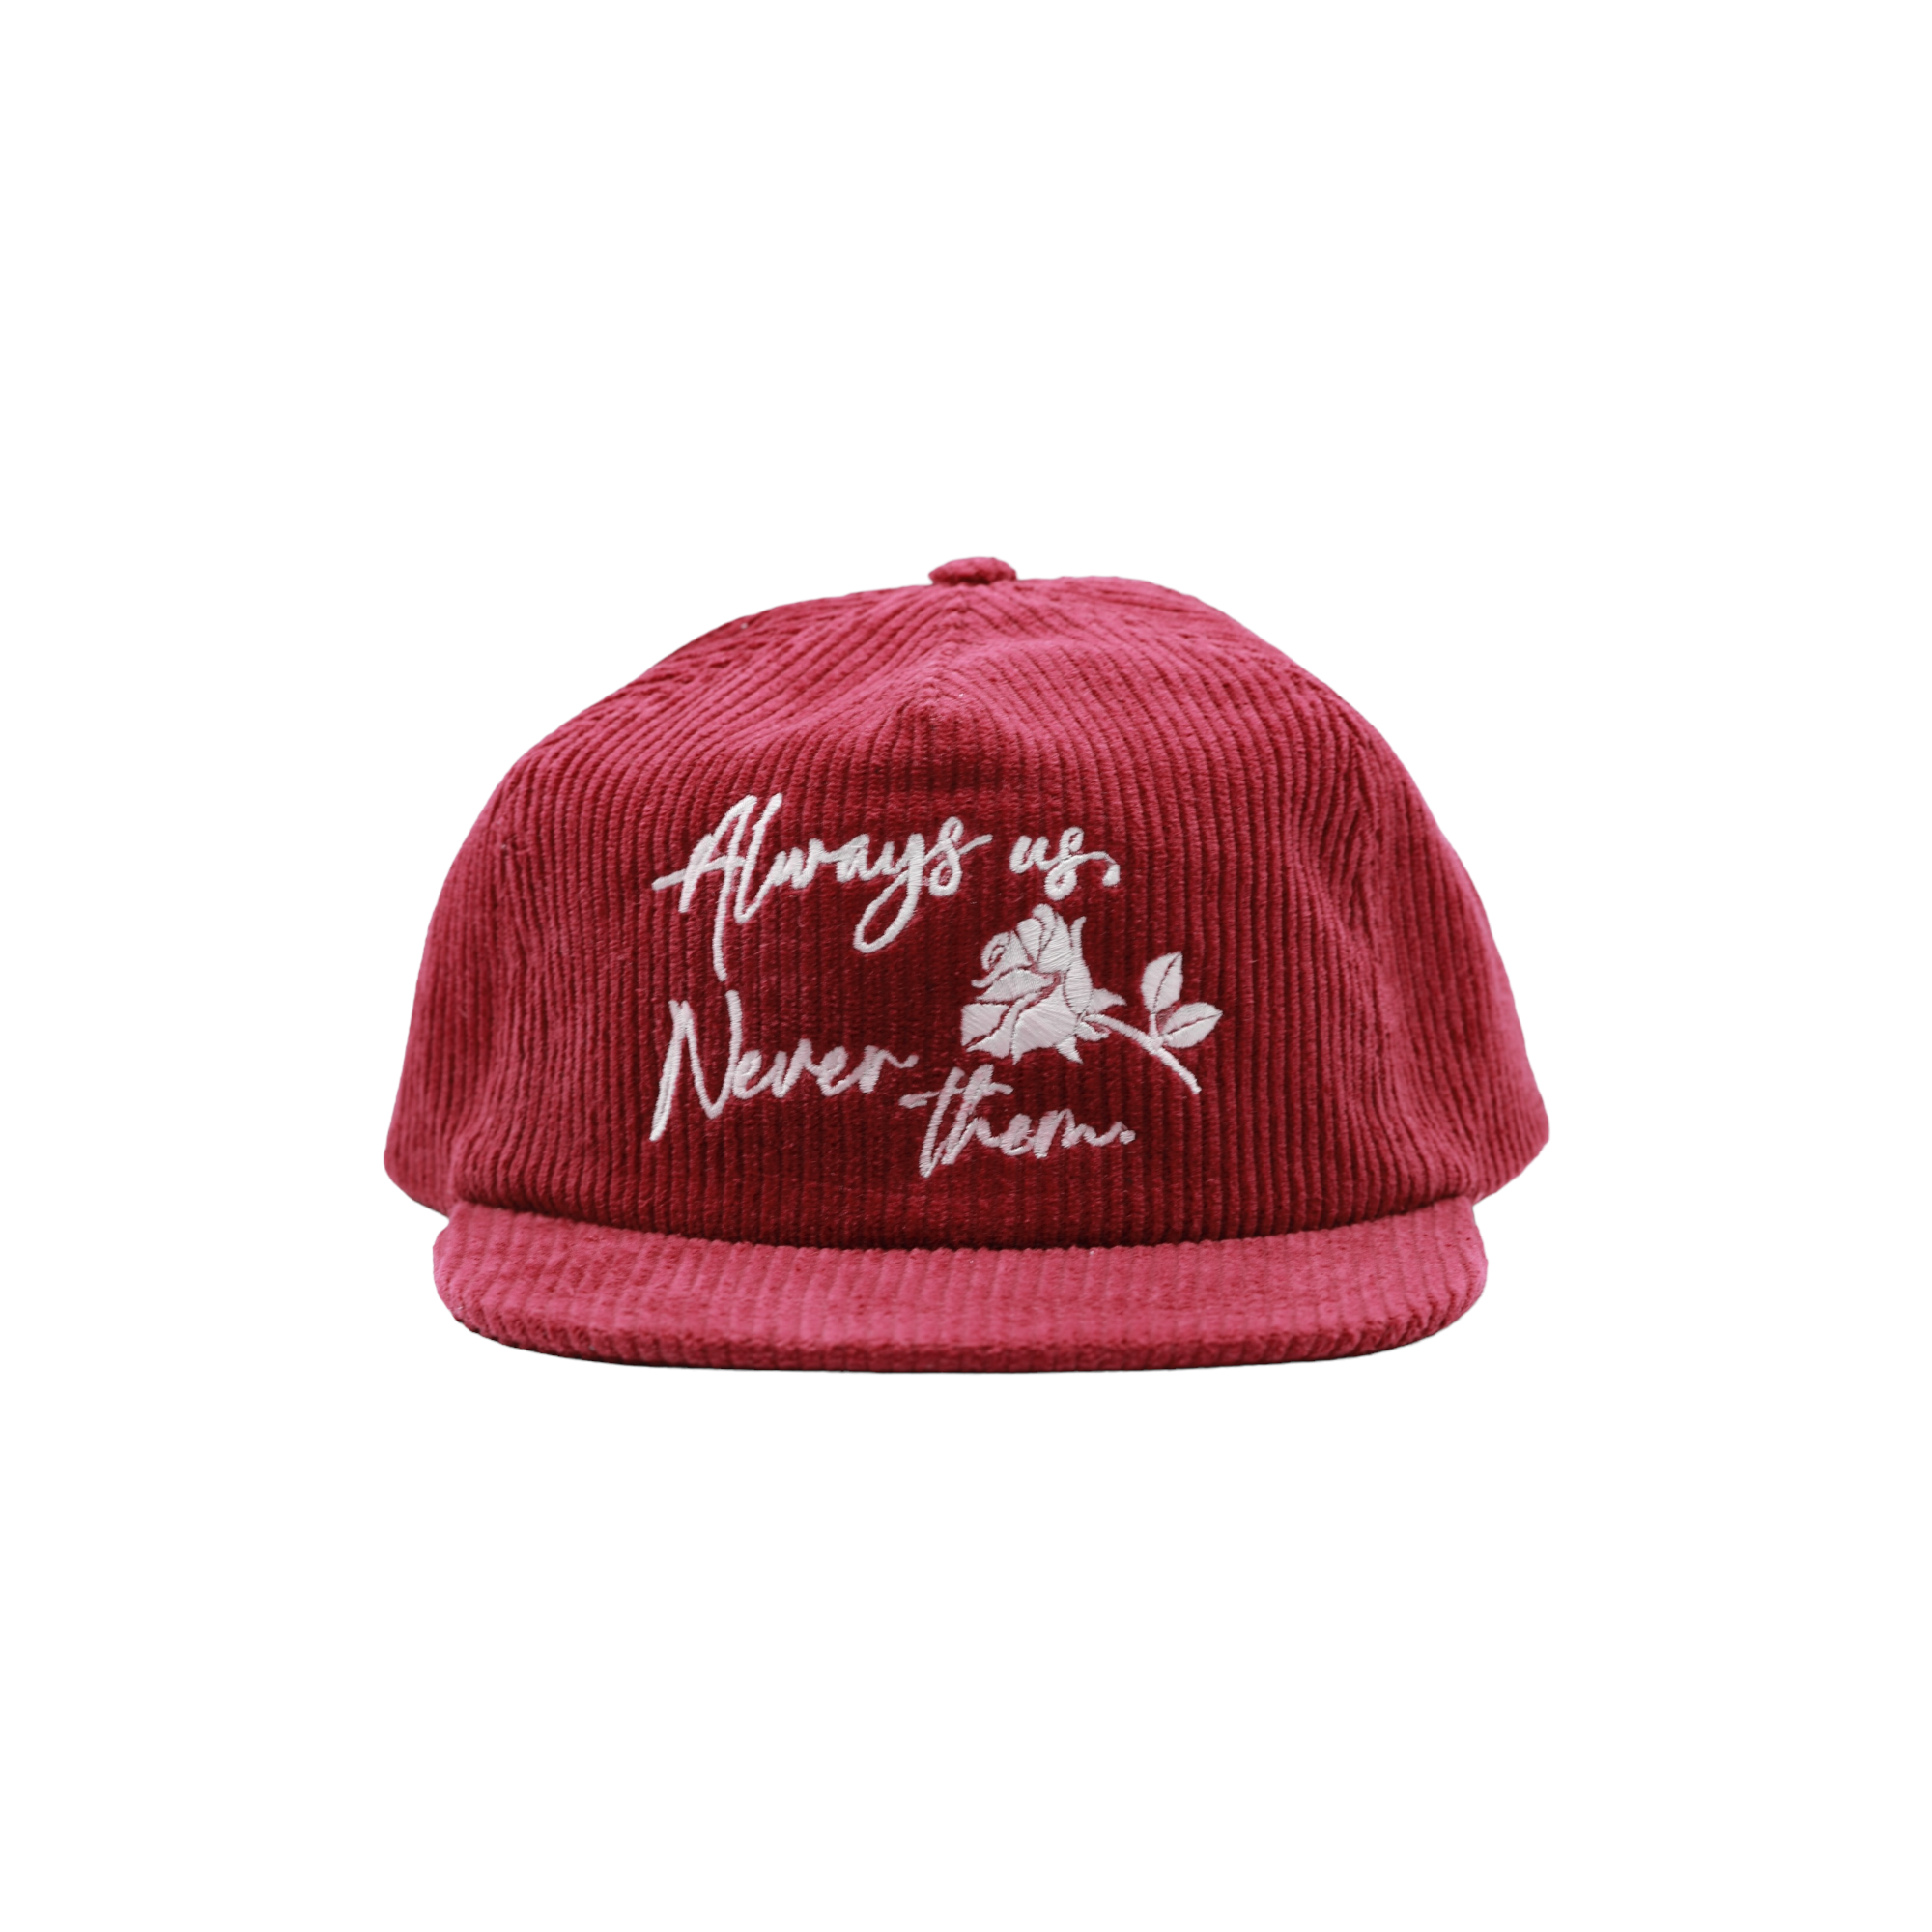 Painters Cap Us, PericoLimited Always Burgundy – Them Corduroy Never -